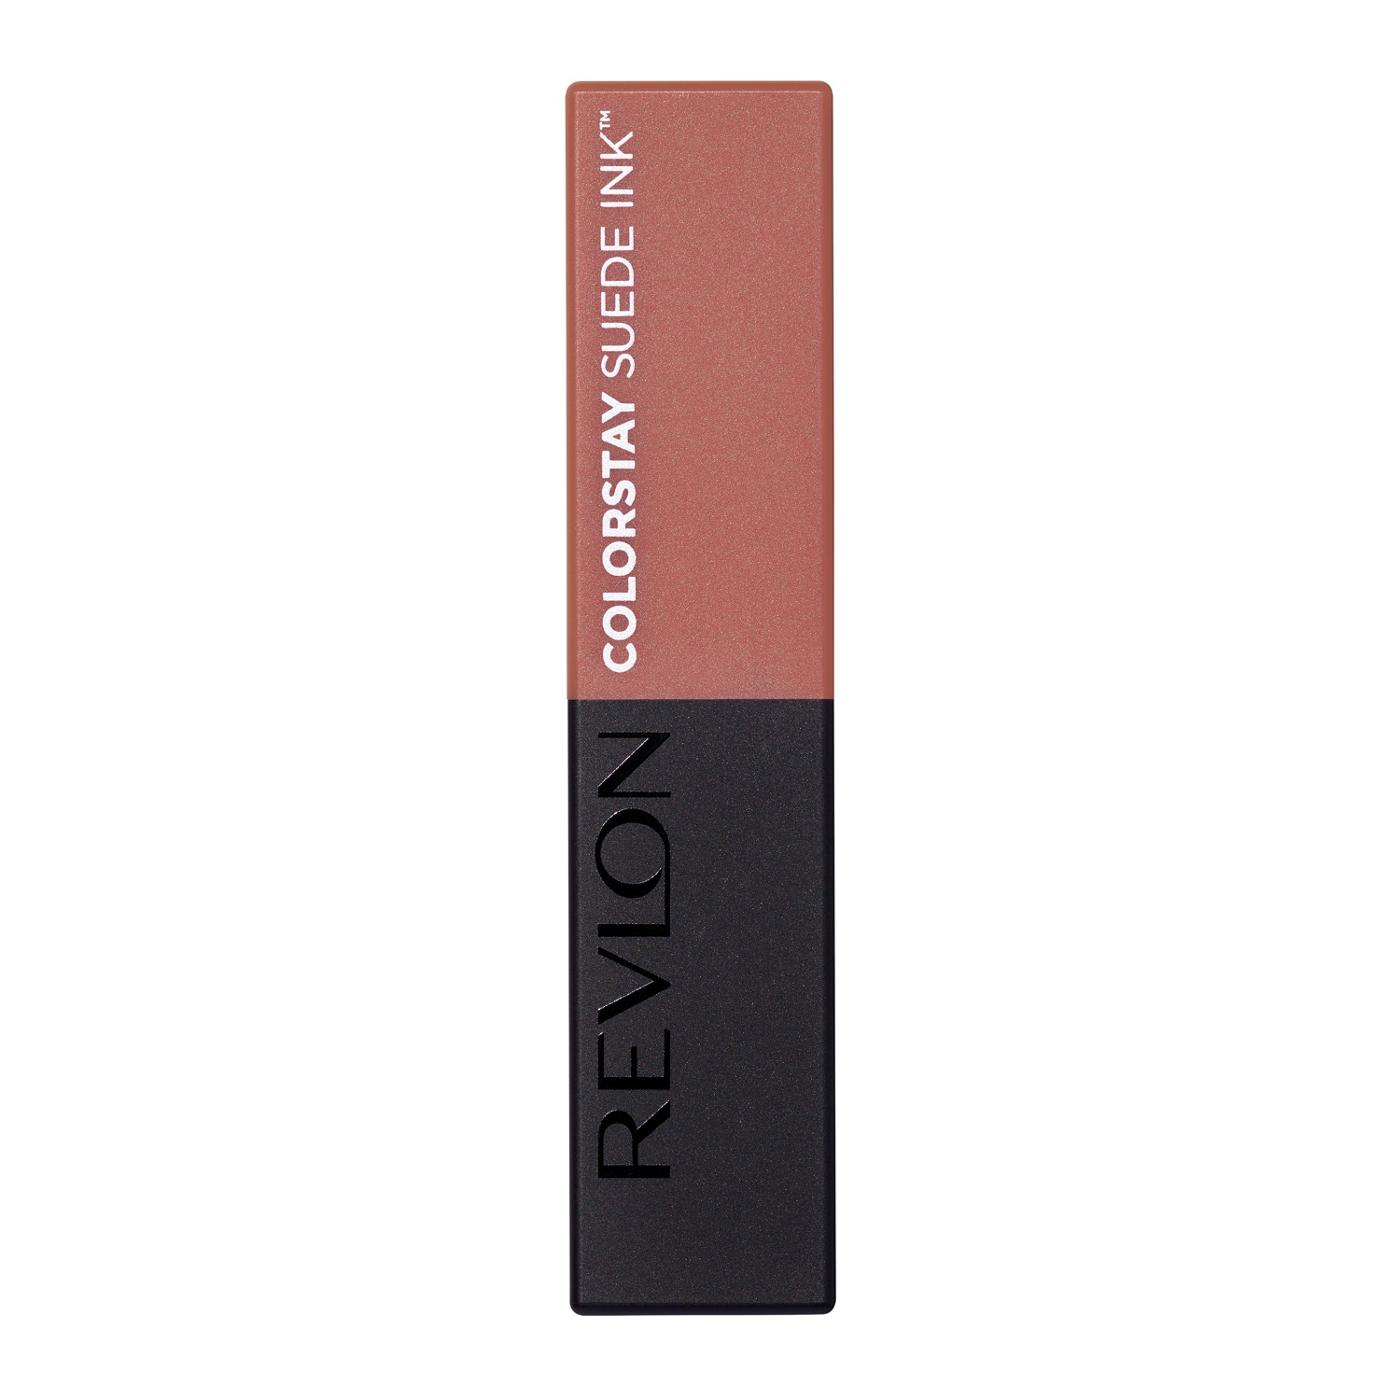 Revlon ColorStay Suede Ink Lipstick - No Rules; image 1 of 5